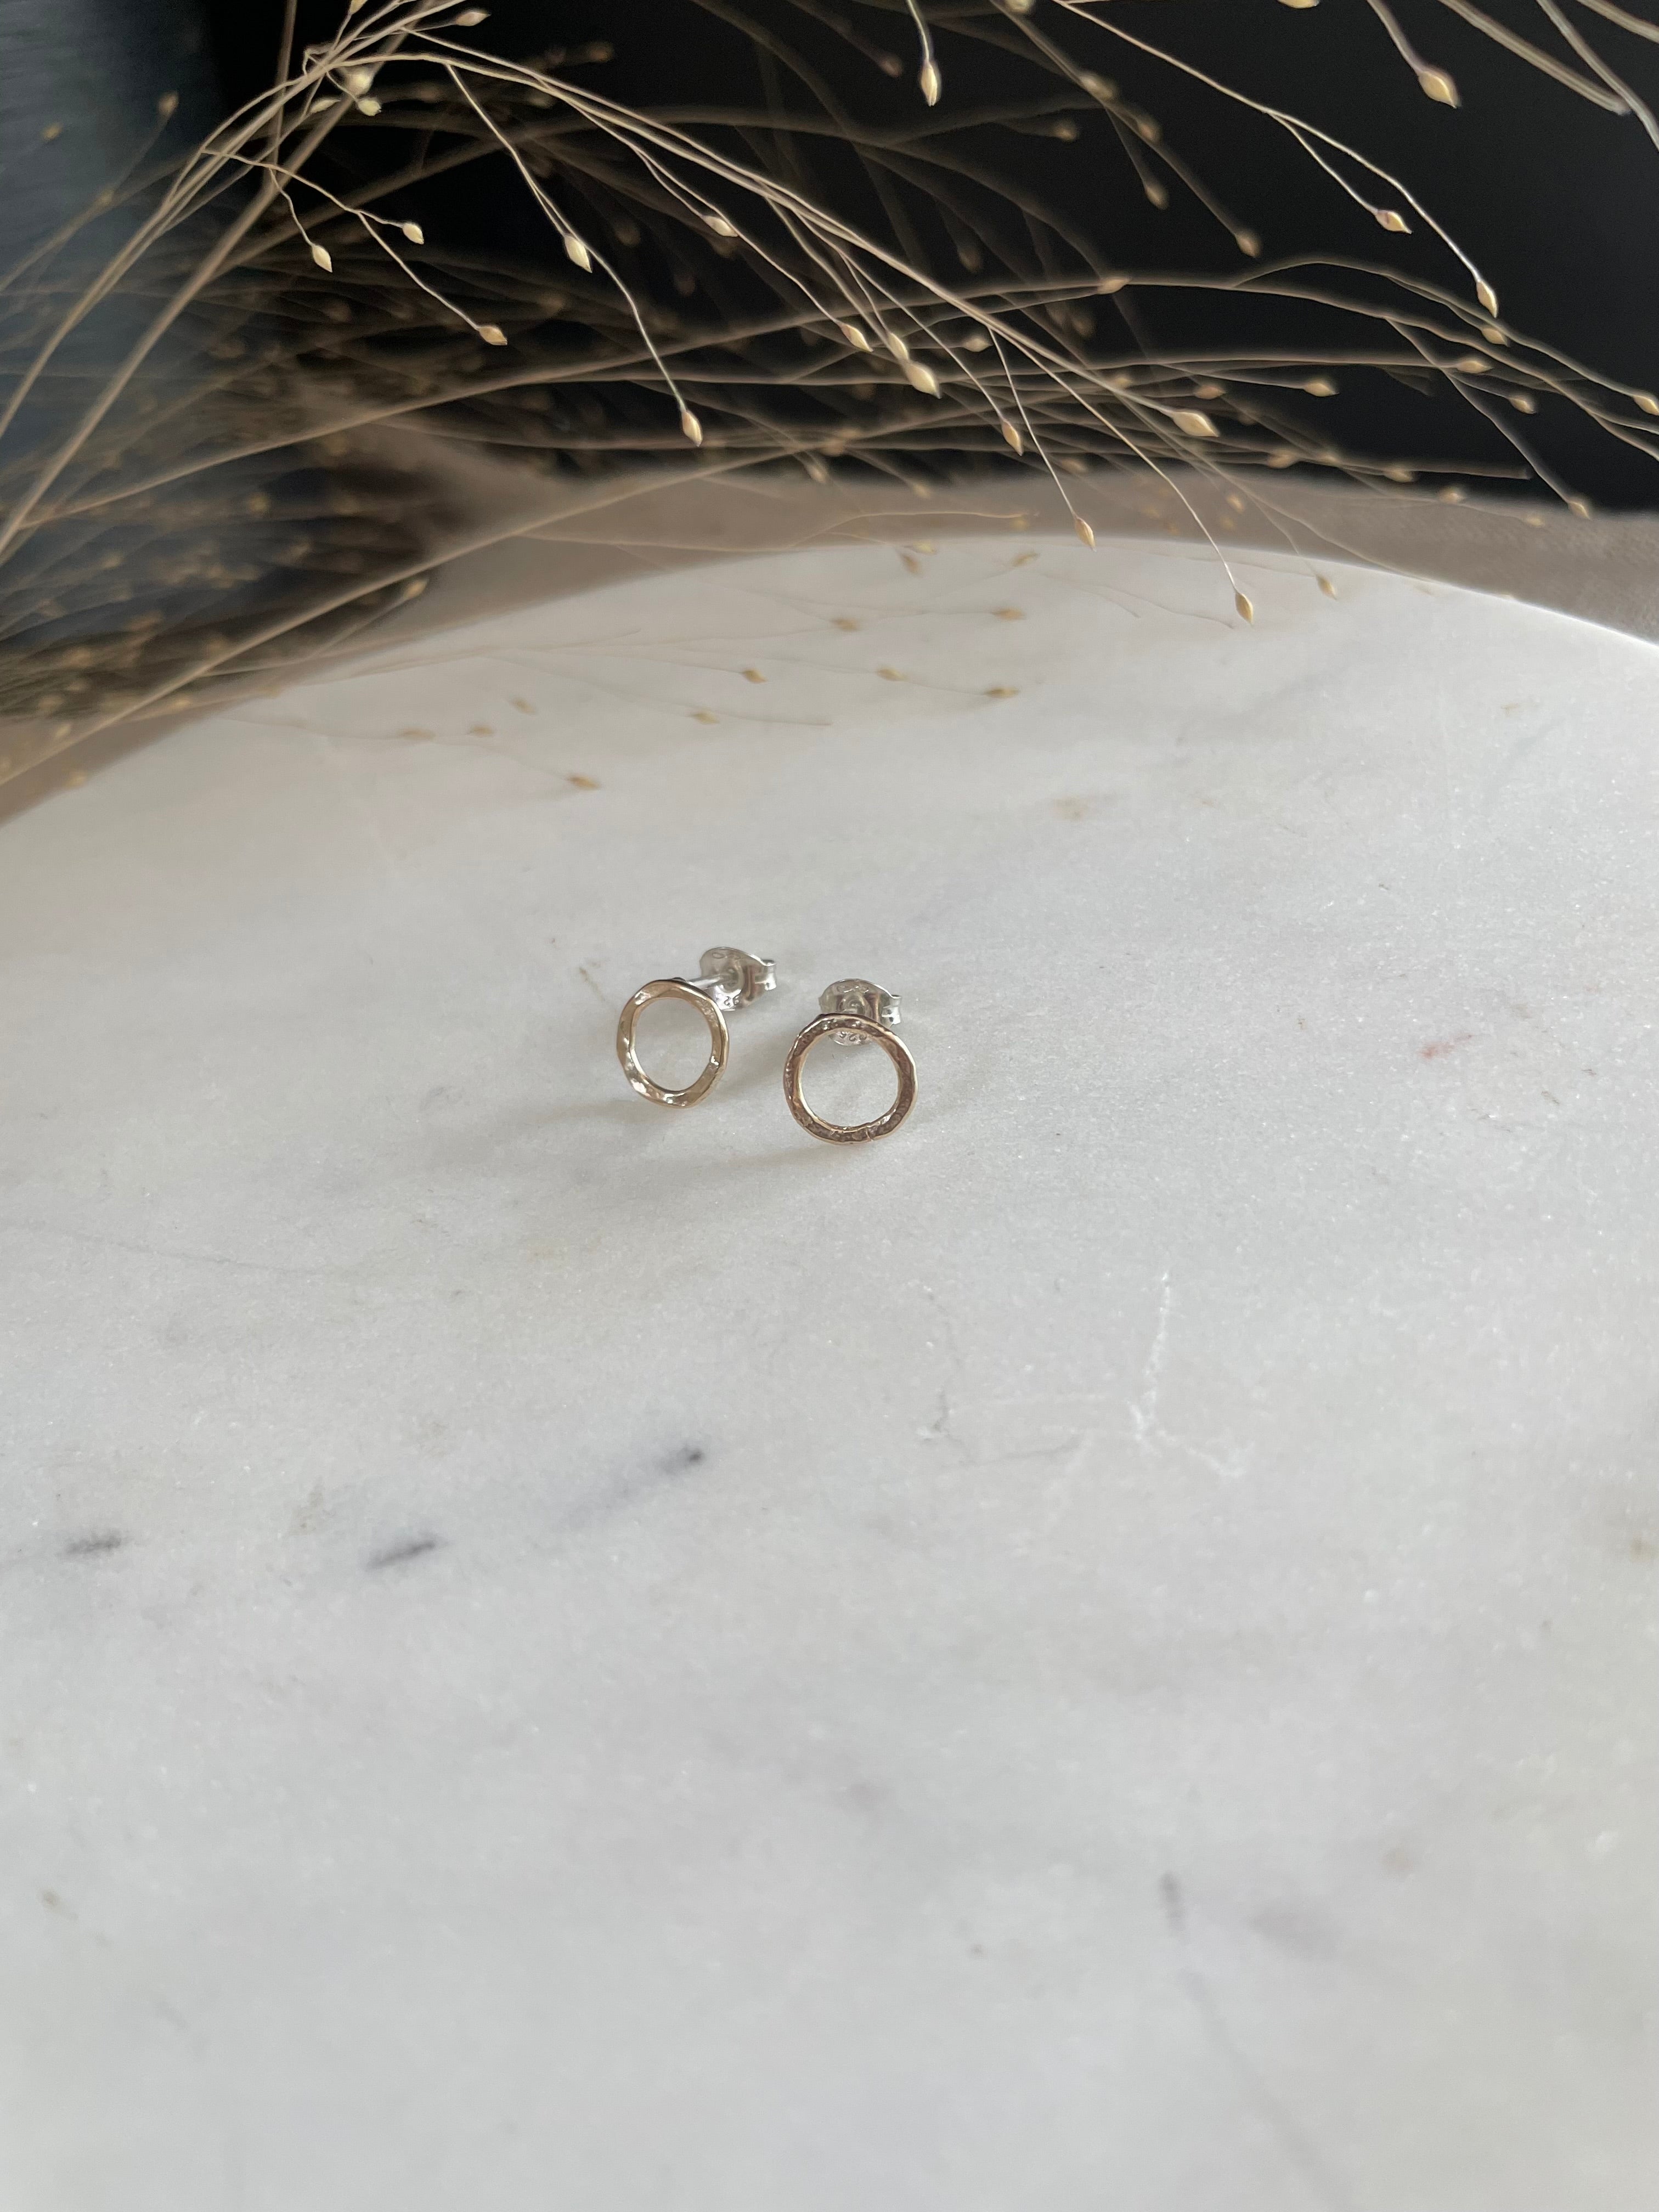 Eternity stud 9ct gold circle earrings with silver pin and backs - handmade recycled gold